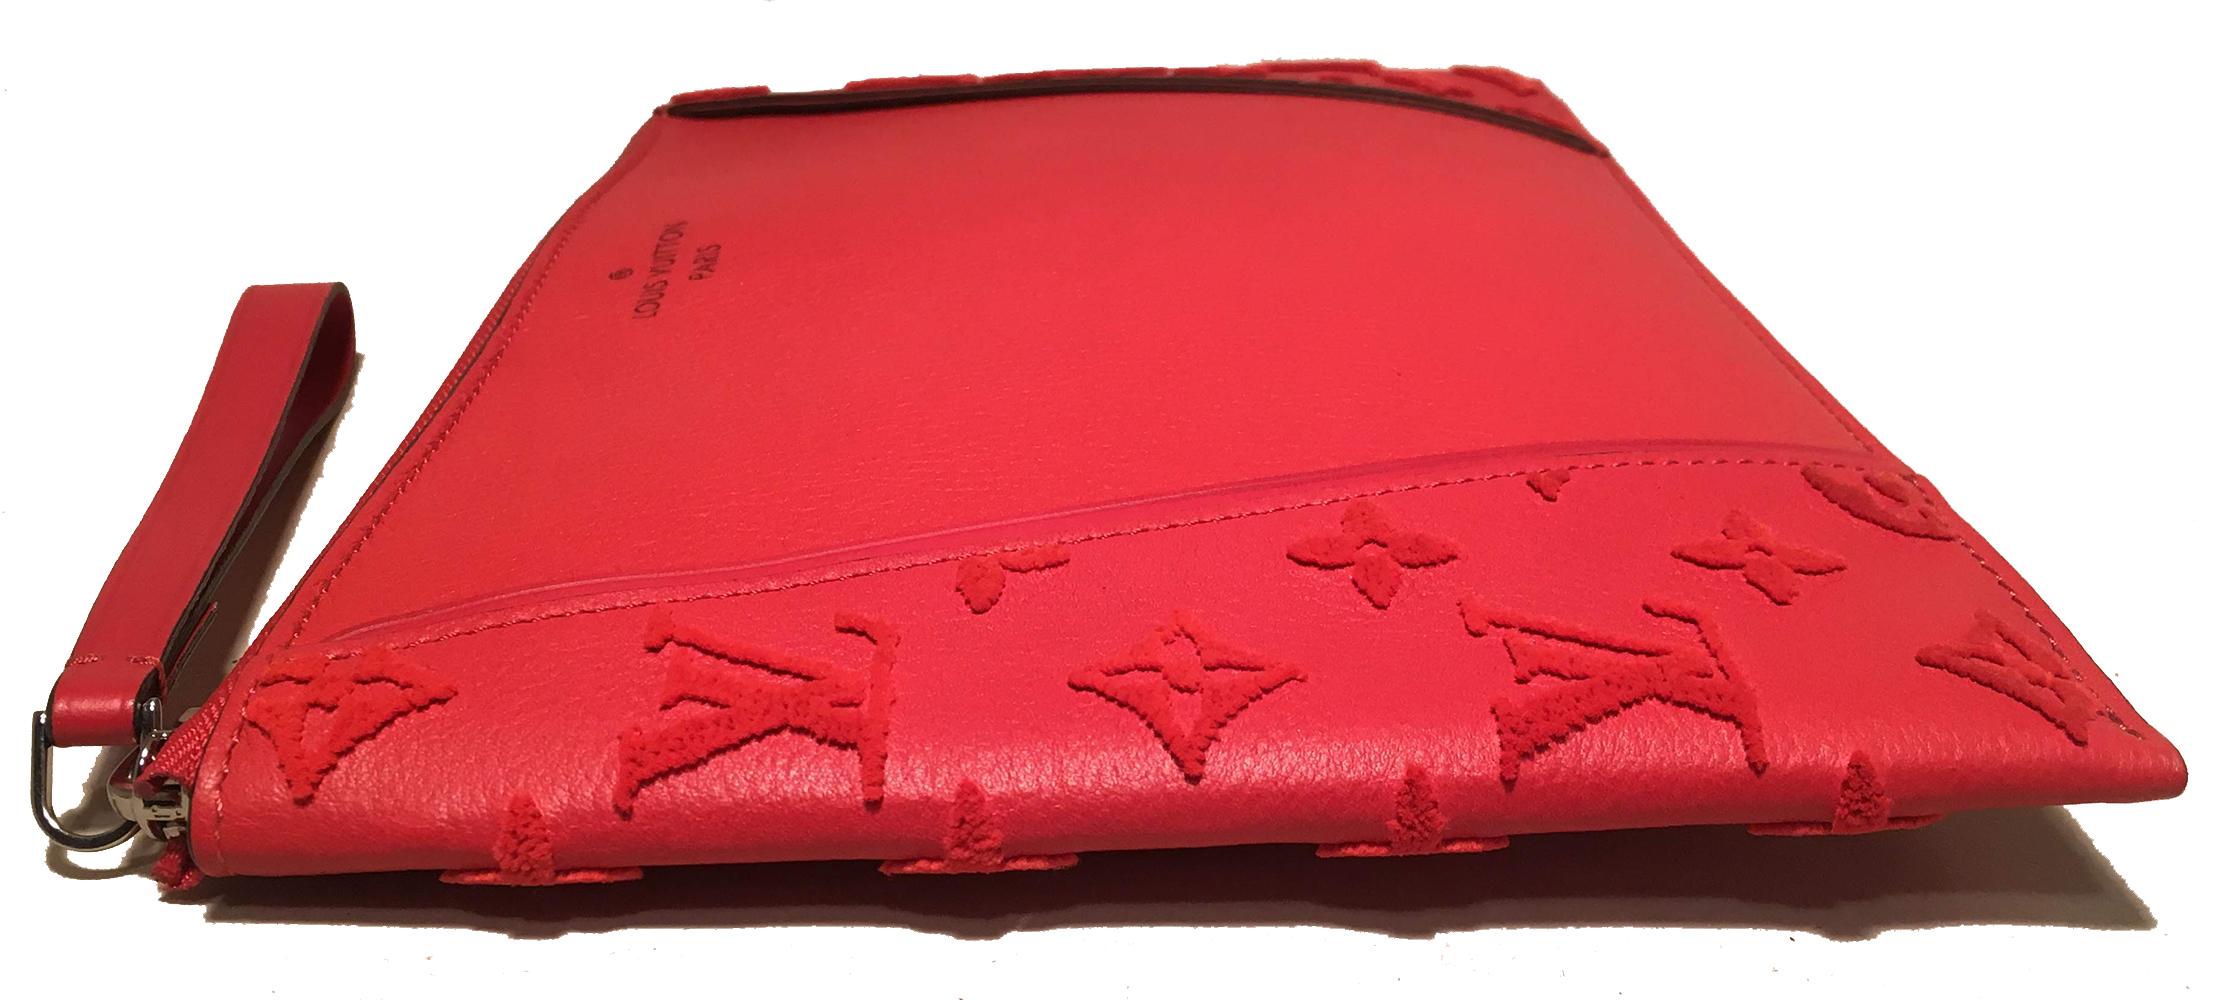 Like New LOUIS VUITTON Monogram Veau Cachemire W Pochette in Framboise Wristlet Clutch in mint condition. Red leather exterior with red velour monogram along sides. Top zipper closure with red leather wrist strap. black leather interior with 6 card